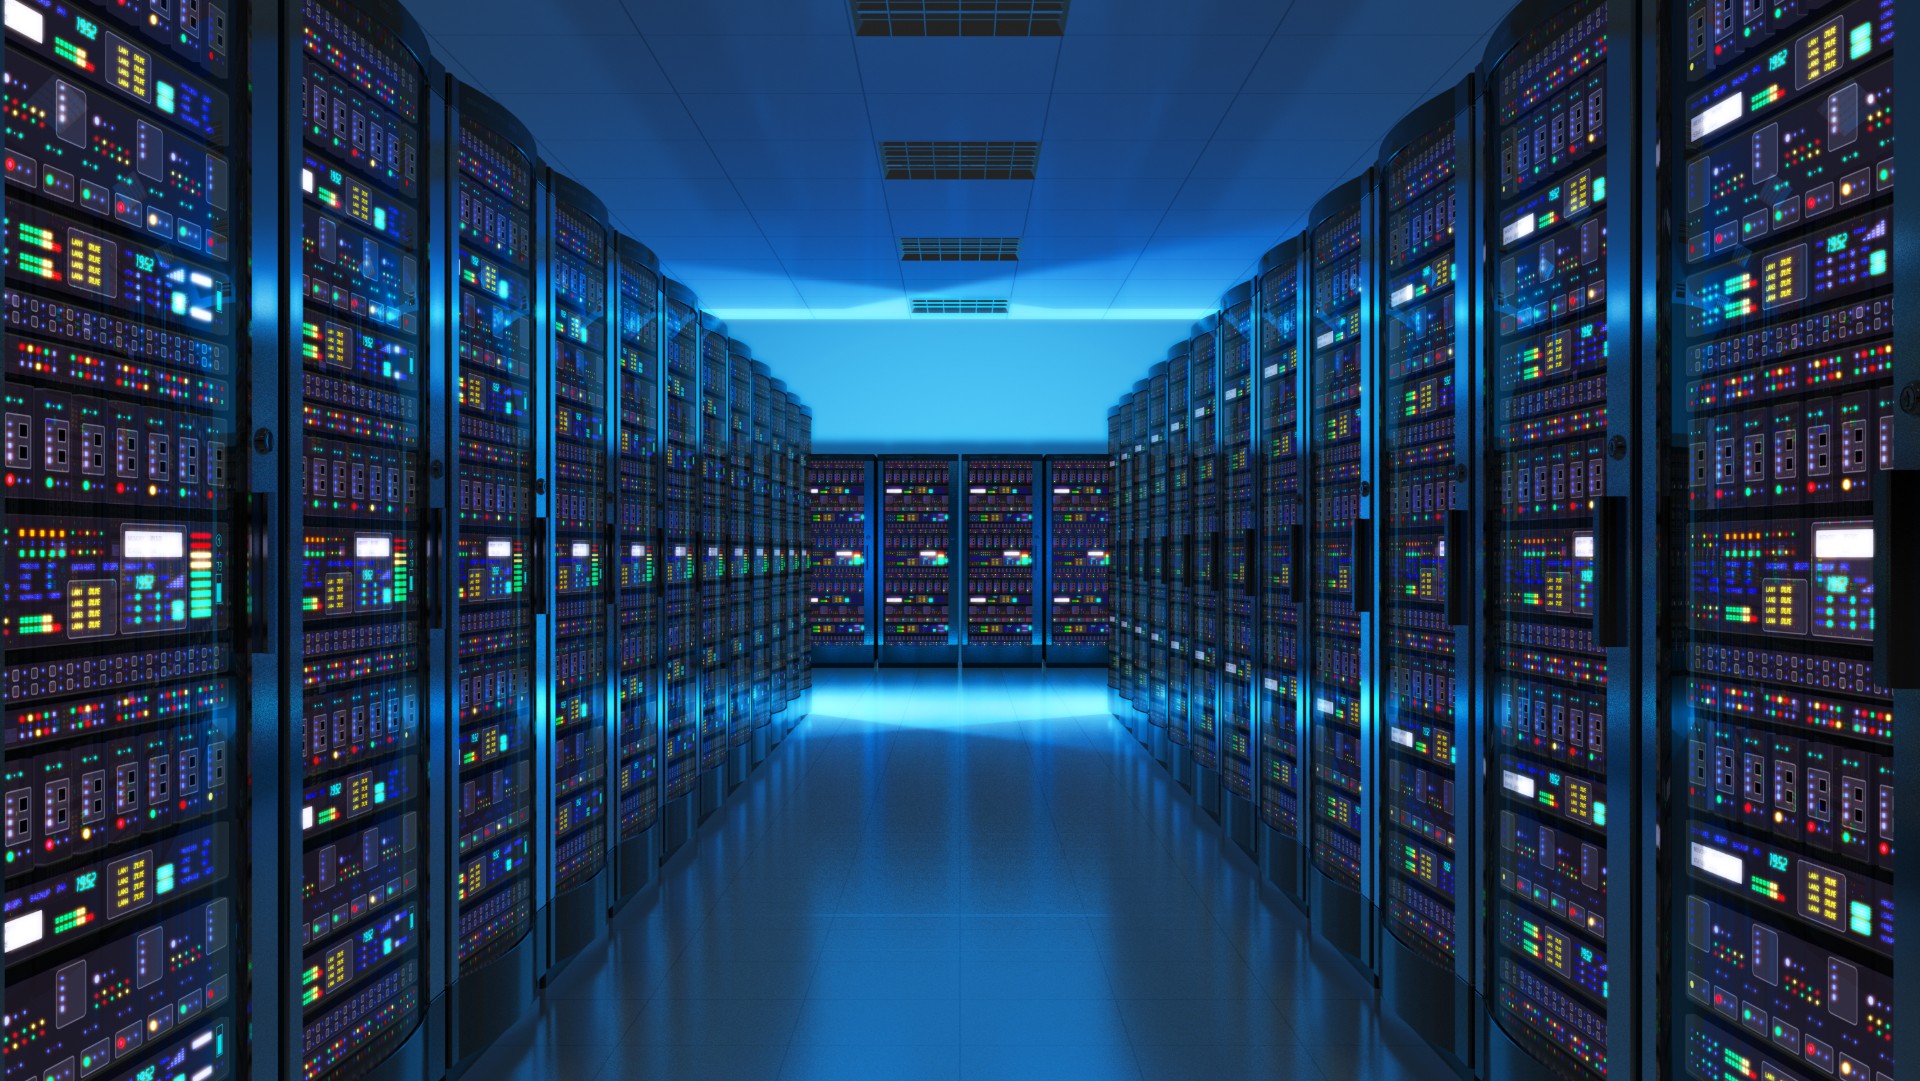 How many servers does a data center have?